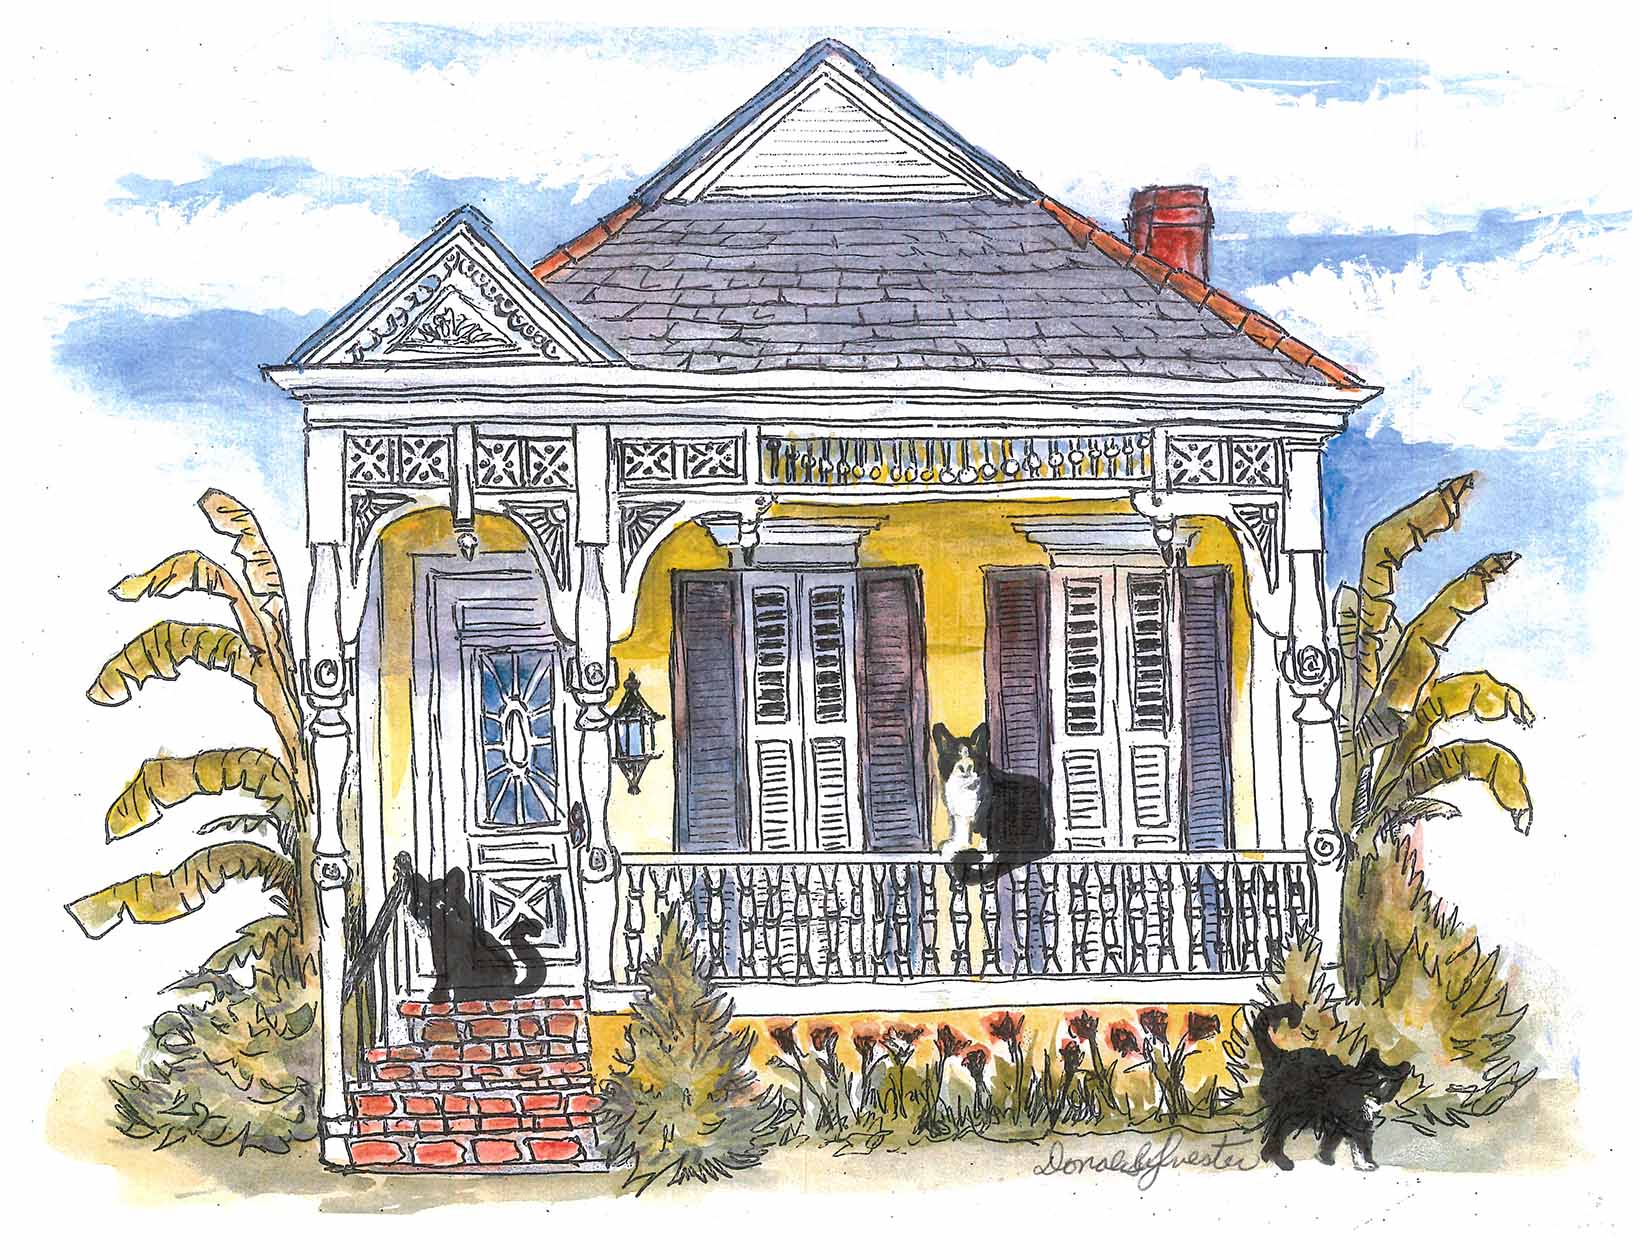 CATS IN A YELLOW SHOTGUN HOUSE IN ORLEANS ON THE FRONT PORCH